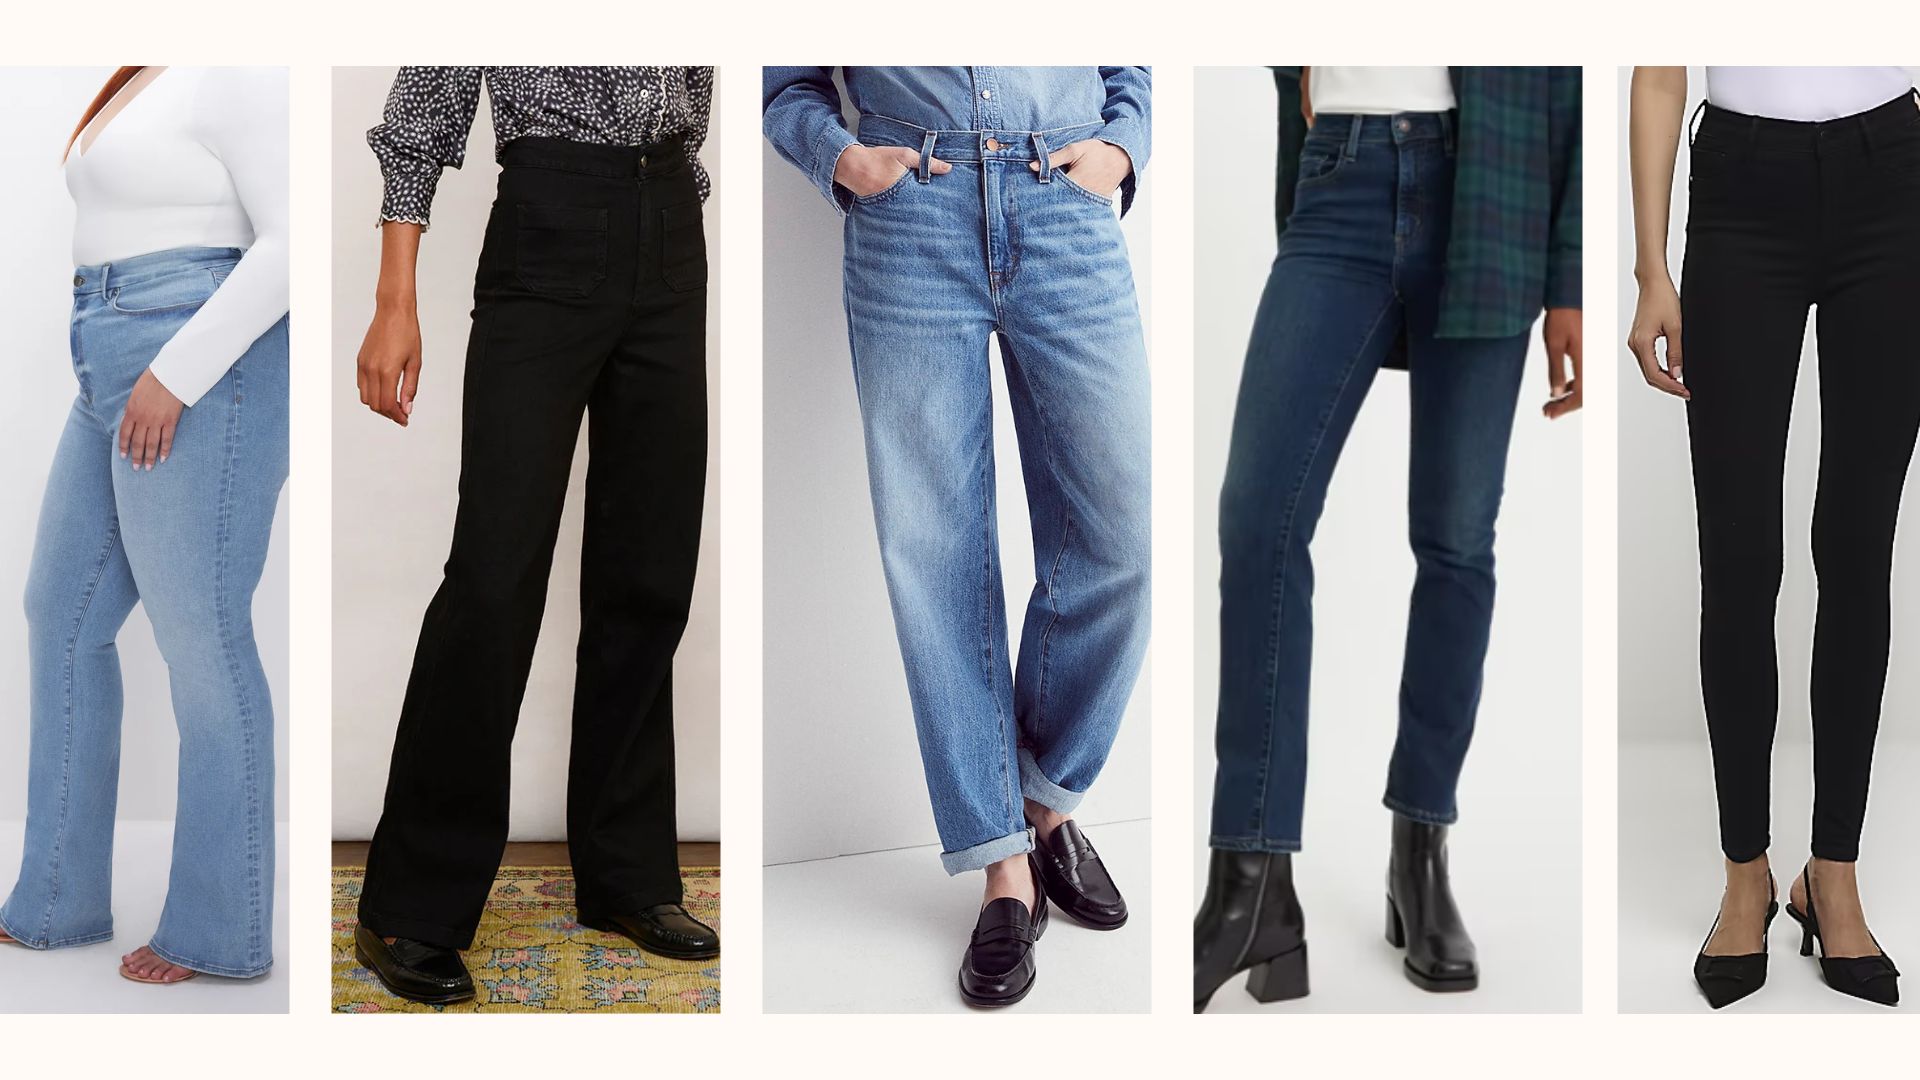 Best jeans for women over 50 selected by style experts